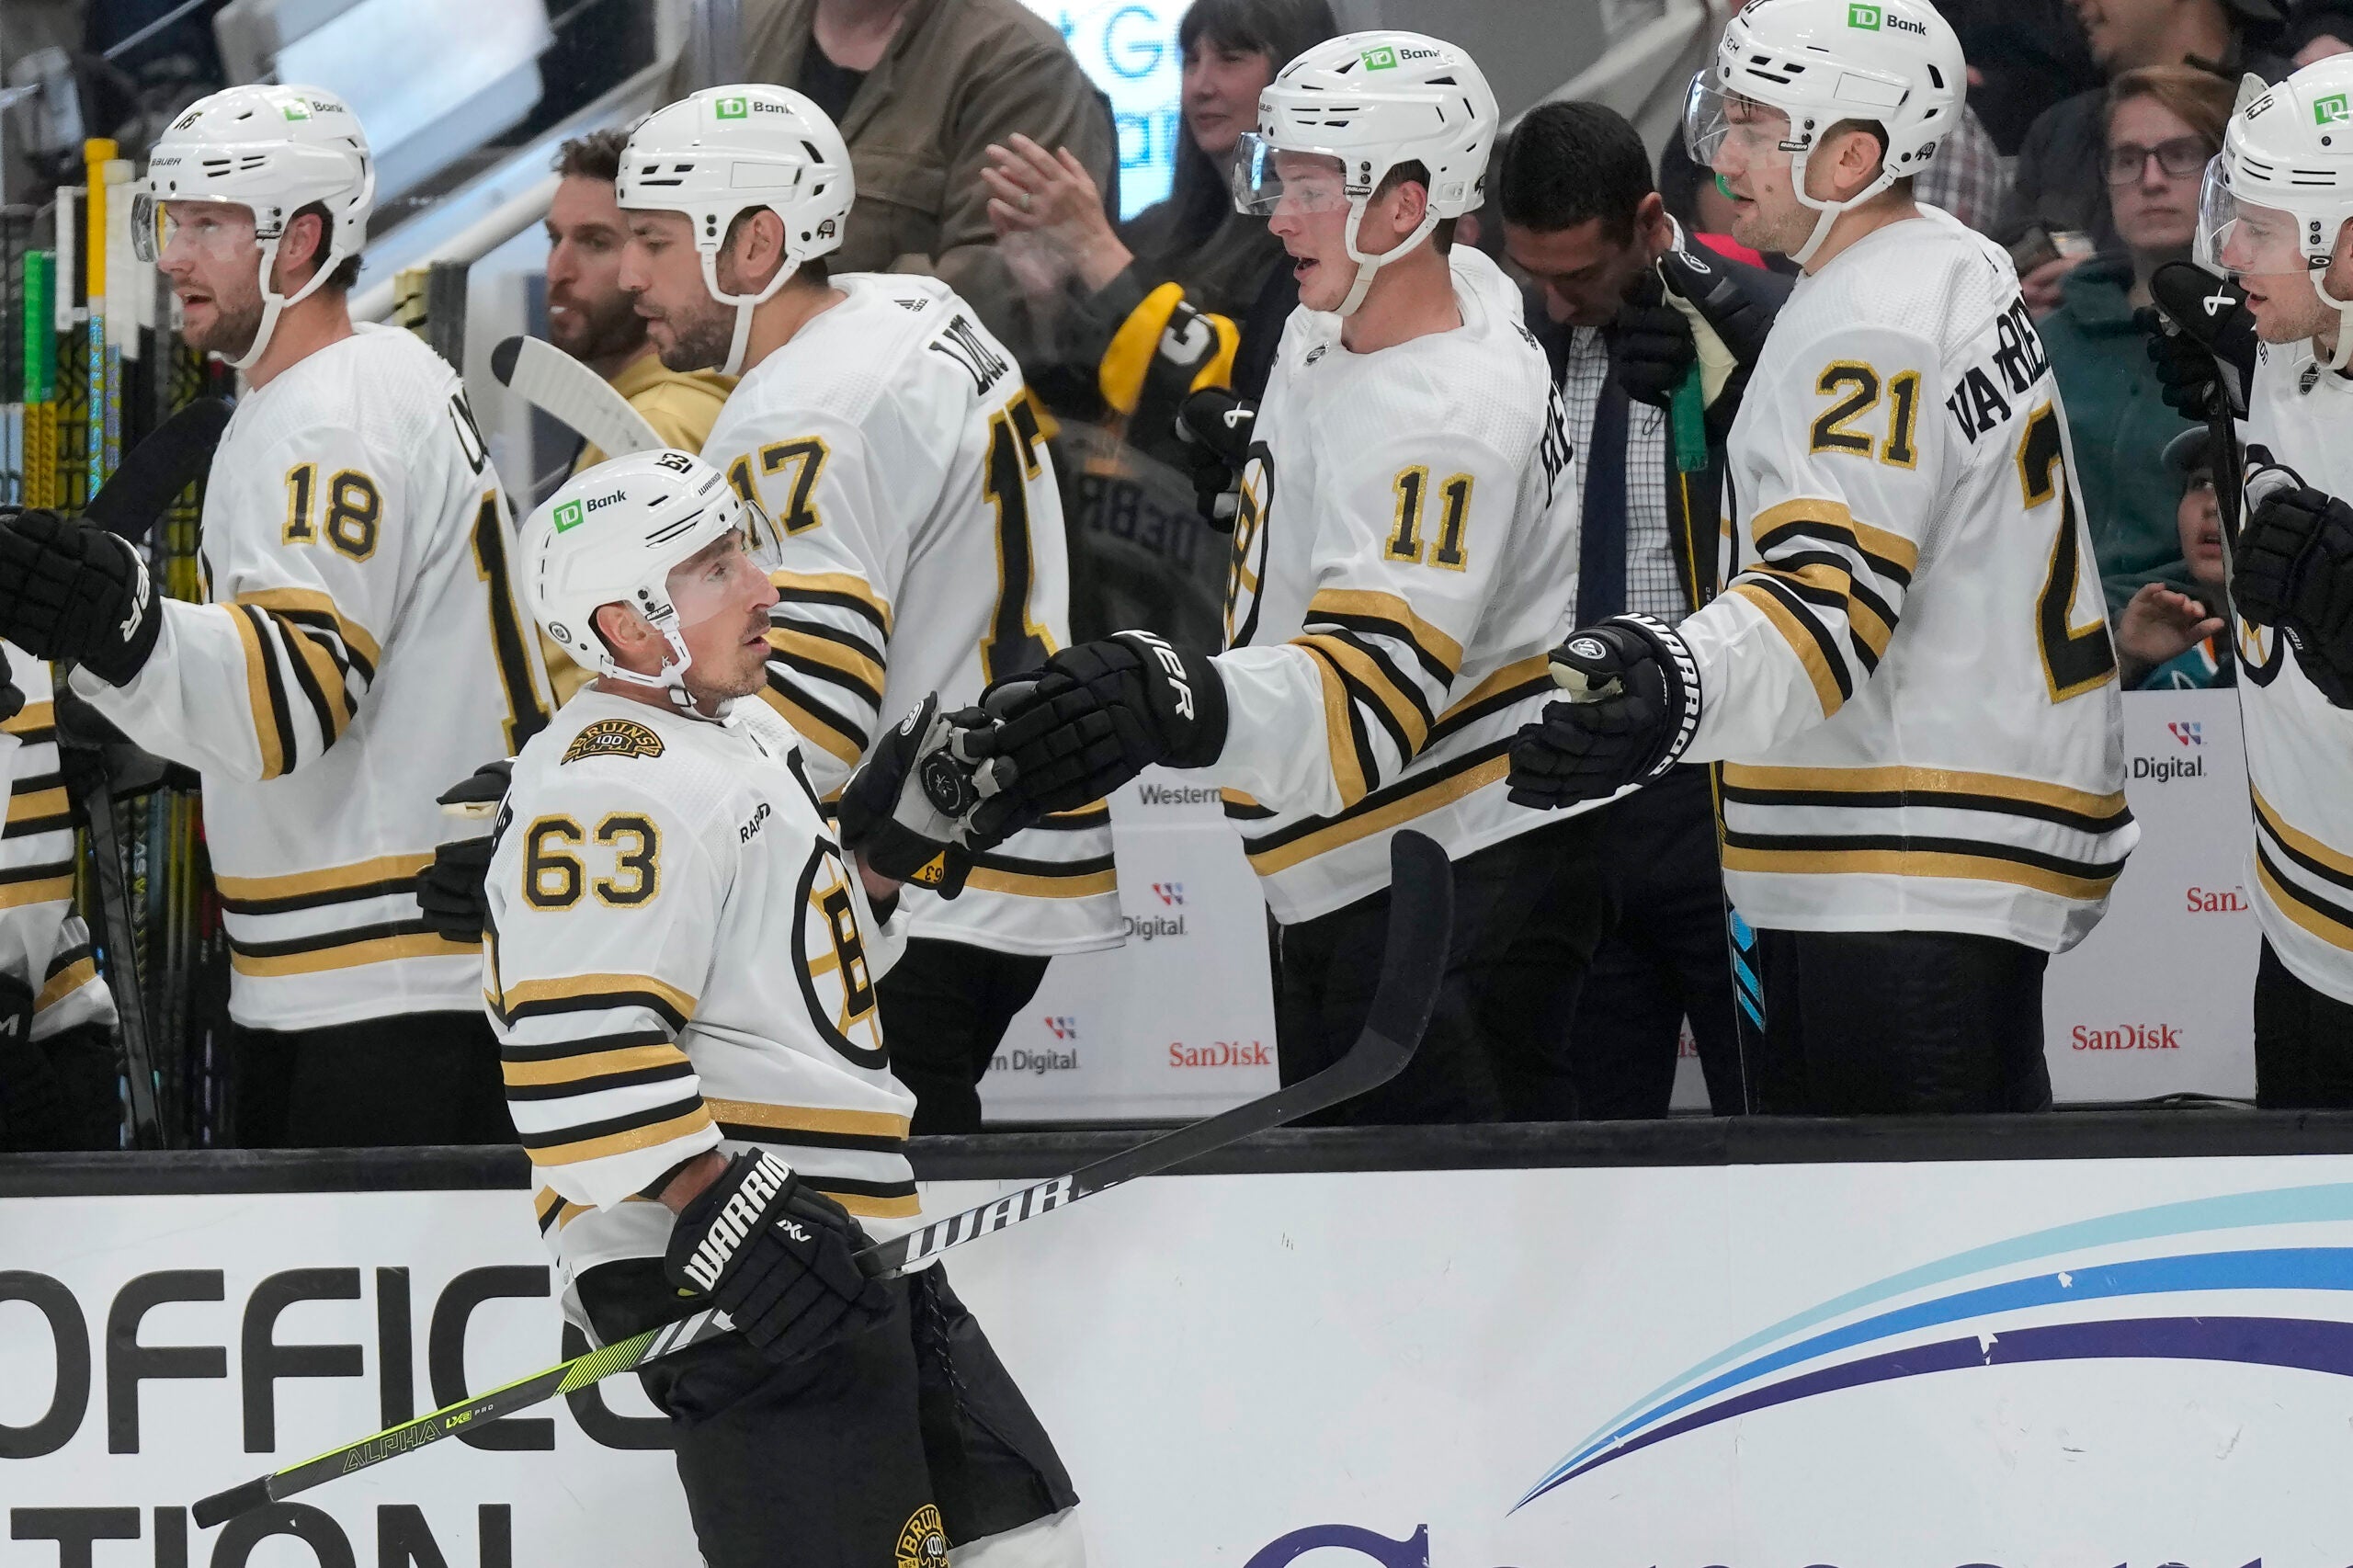 Keeping Coyle, Frederic together should be priority for Bruins